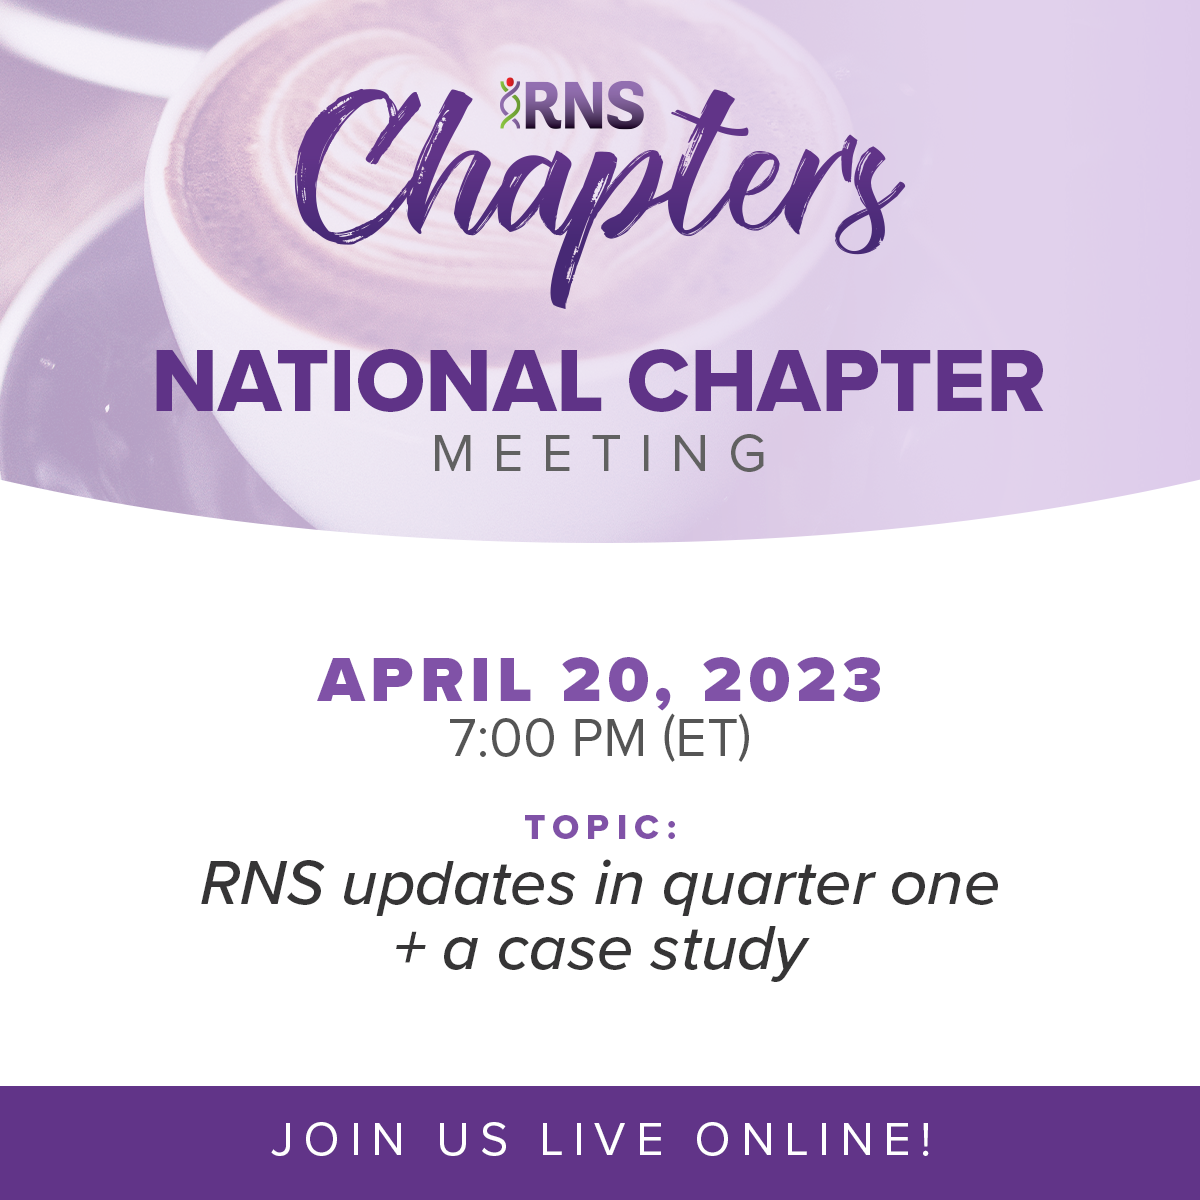 National Chapter Meeting - April 20, 2023